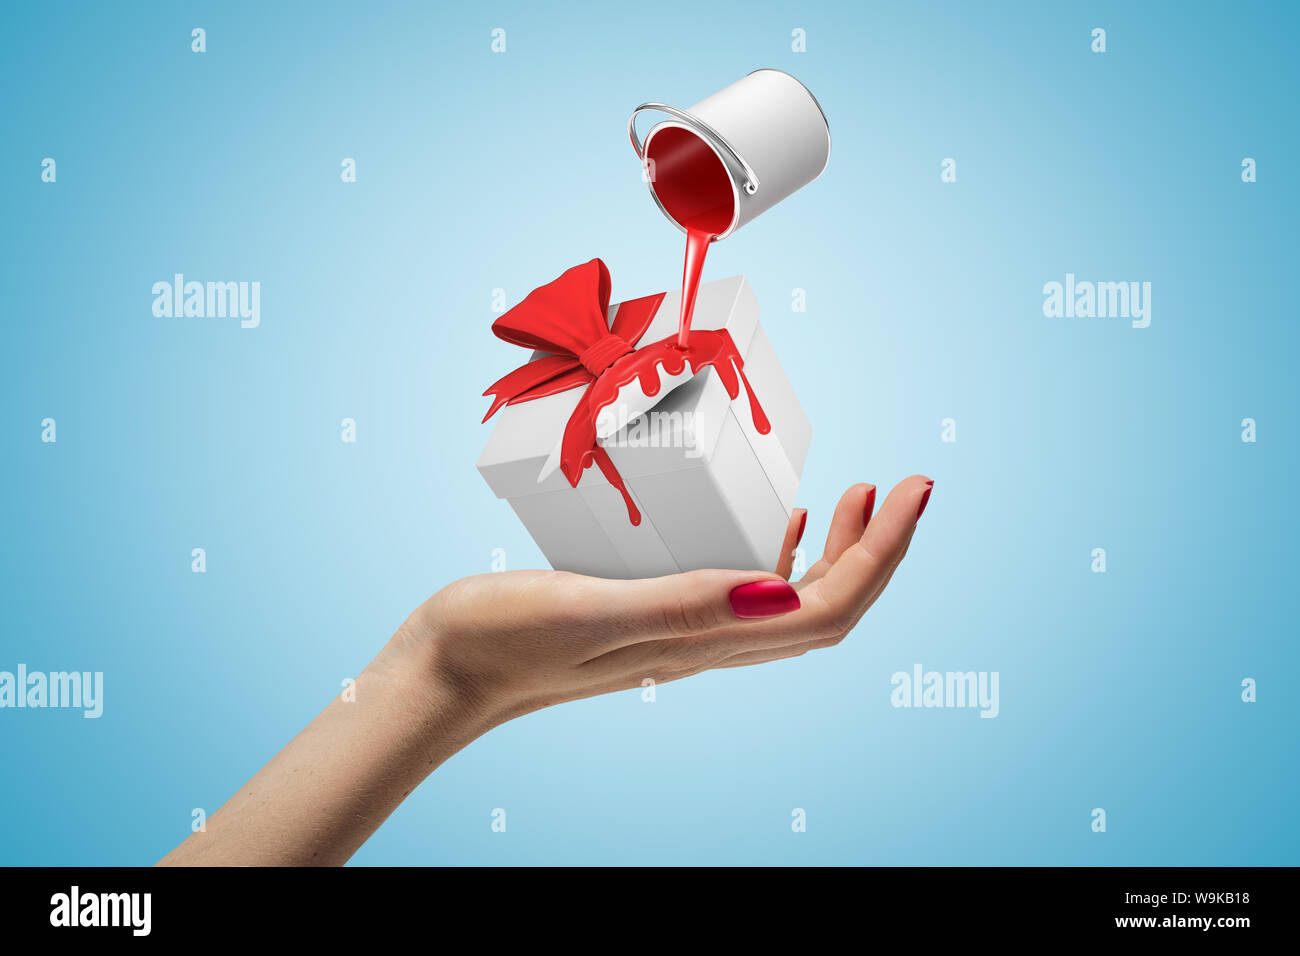 Female hand with red paint bucket turned upside down above white gift box on blue background Stock Photo